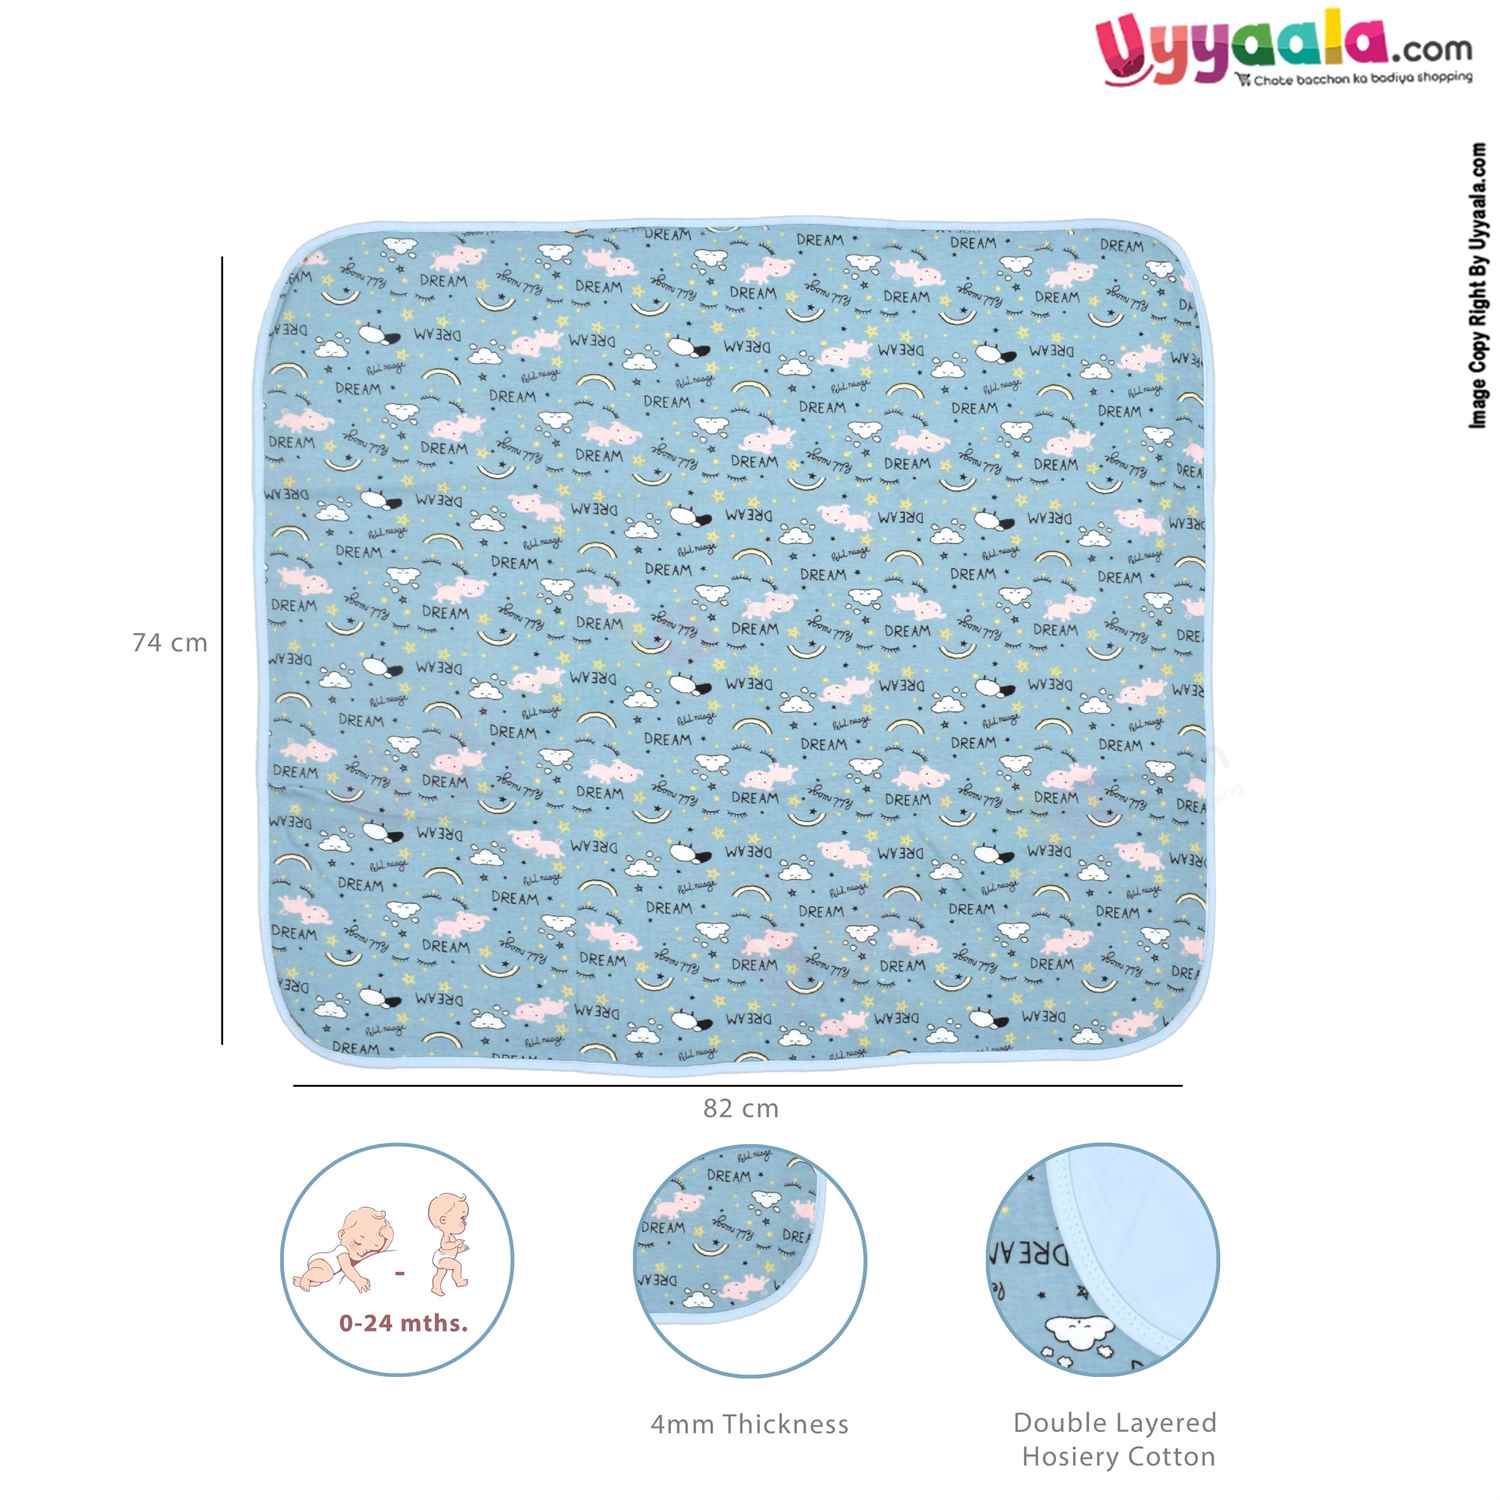 Double Layered Hosiery Cotton Wrapper Premium with Dog & Stars Print for Babies 0-24m Age, Size(82*74cm)-Blue